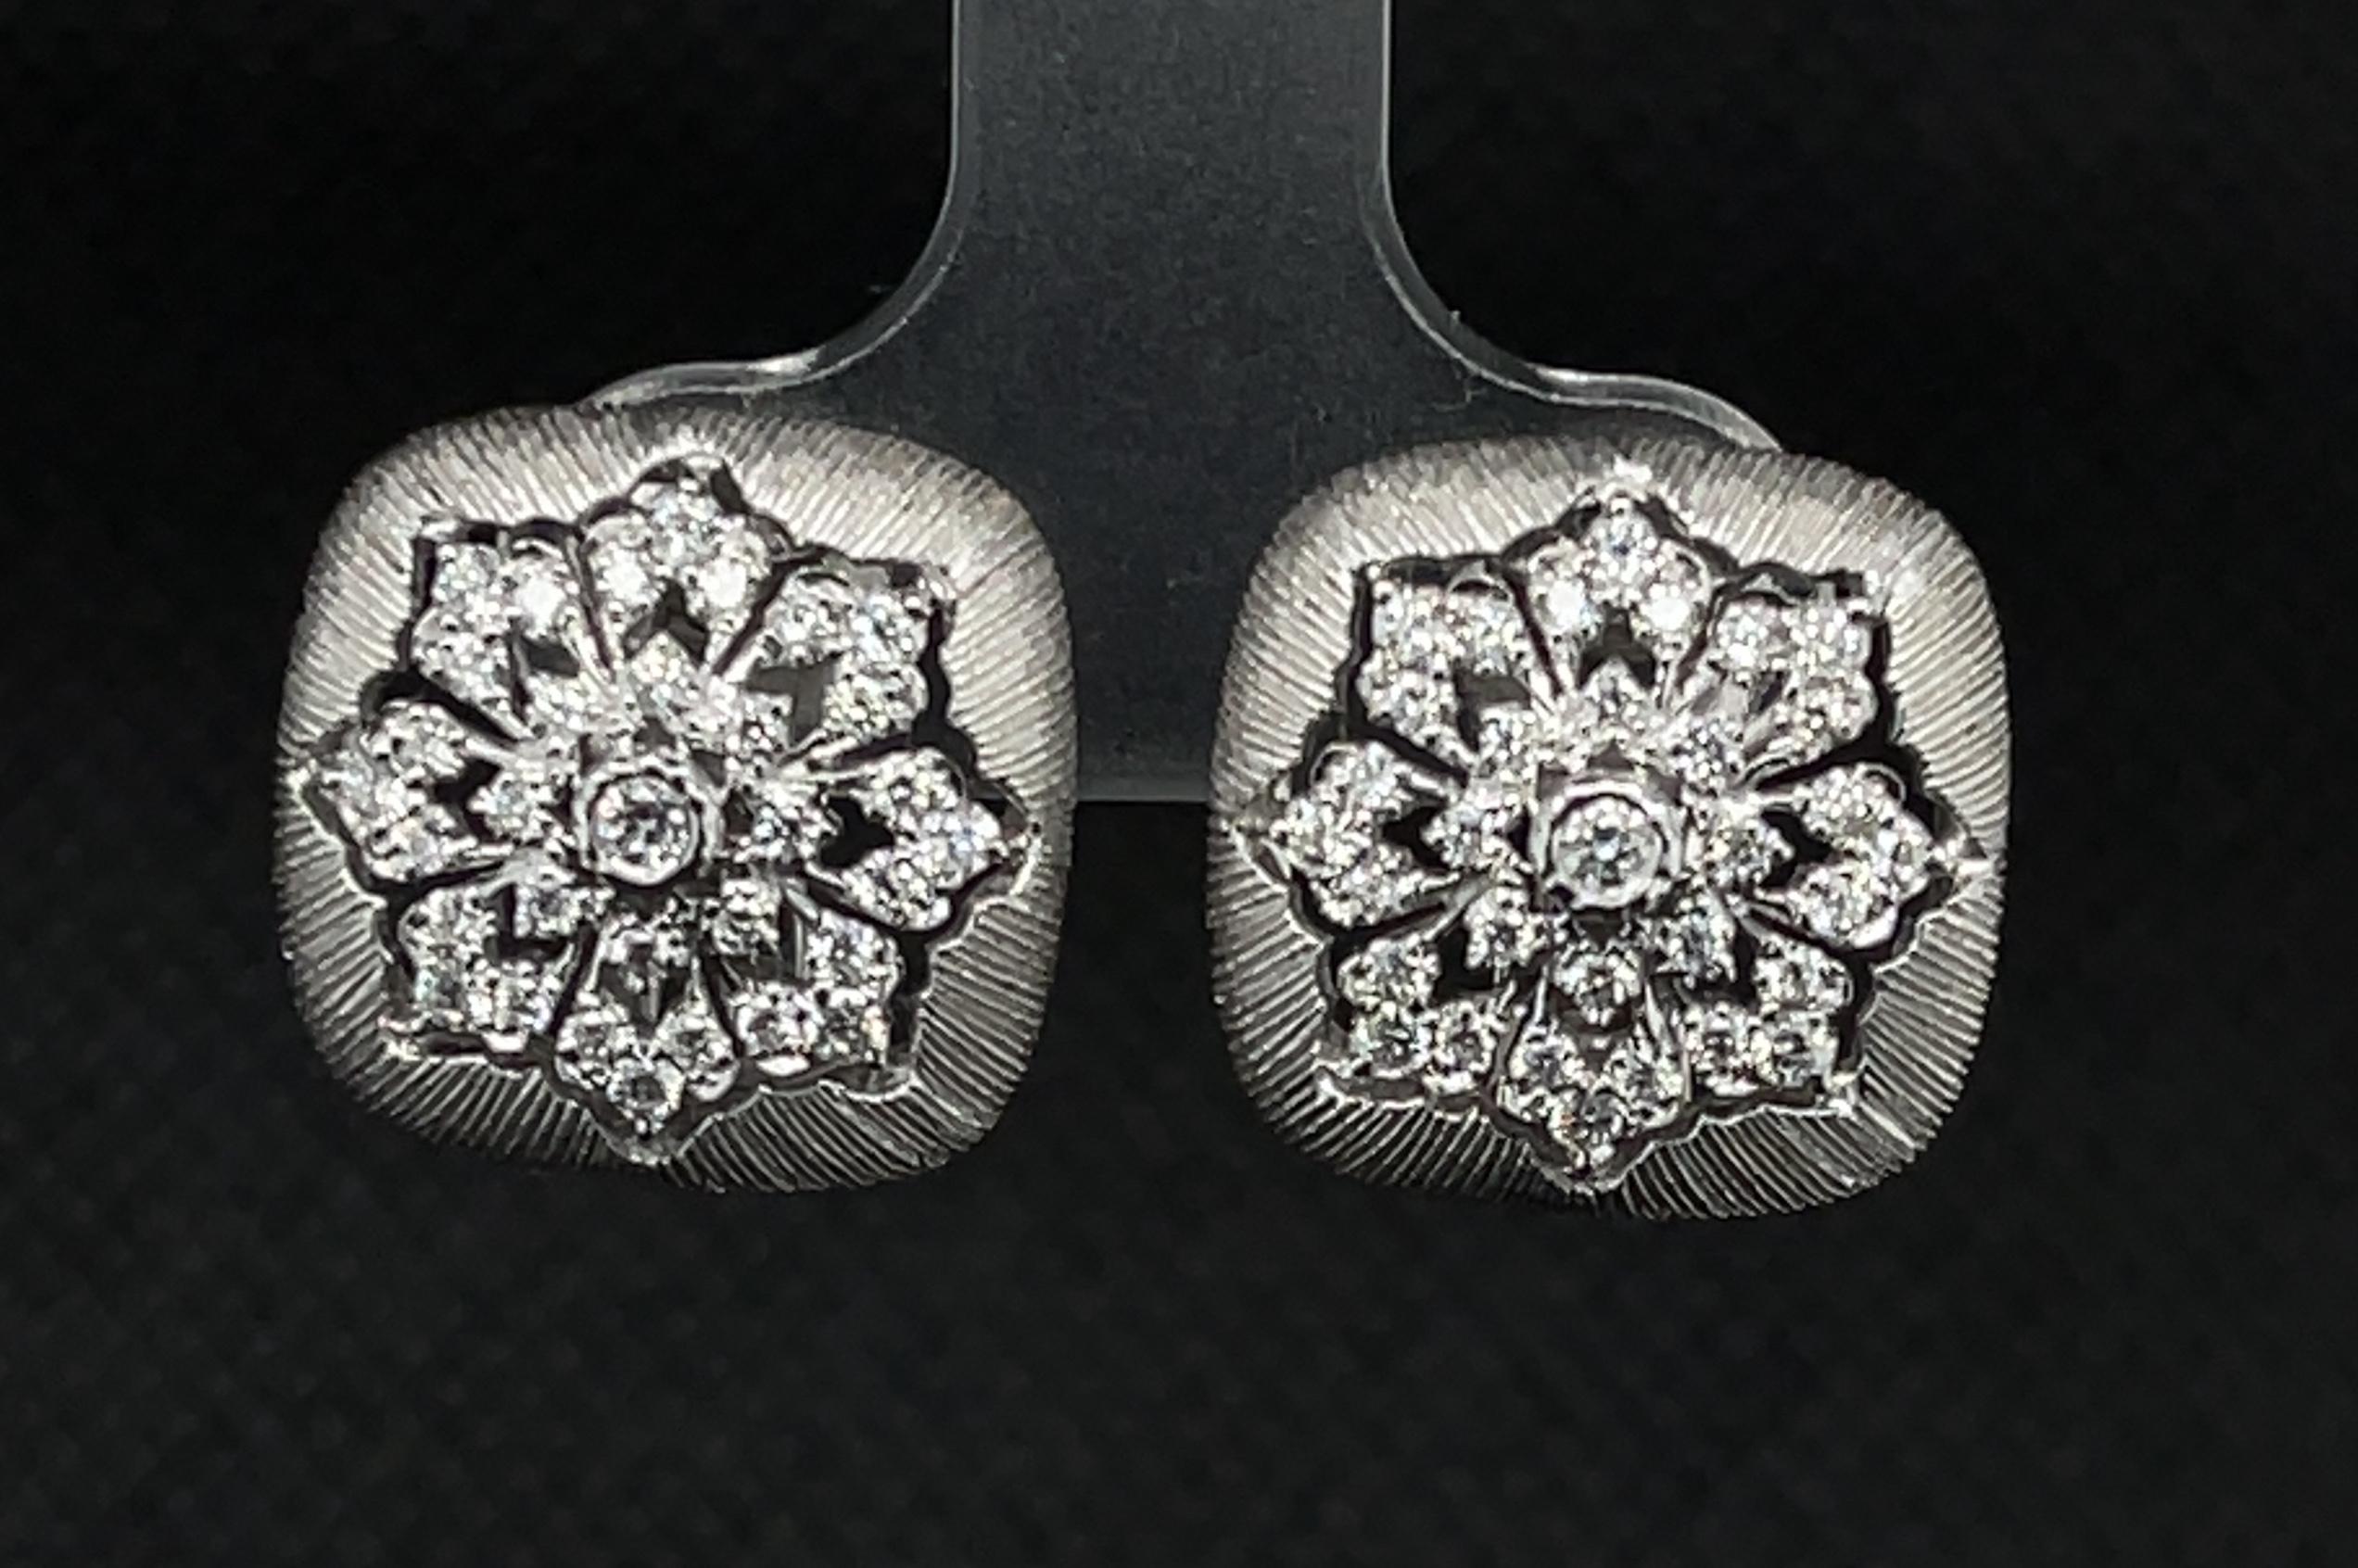 These Florentine inspired earrings feature bright, sparkling diamonds set in 18k white gold with French clip backs. Brilliant diamonds are set in a floral starburst against an exquisite hand-